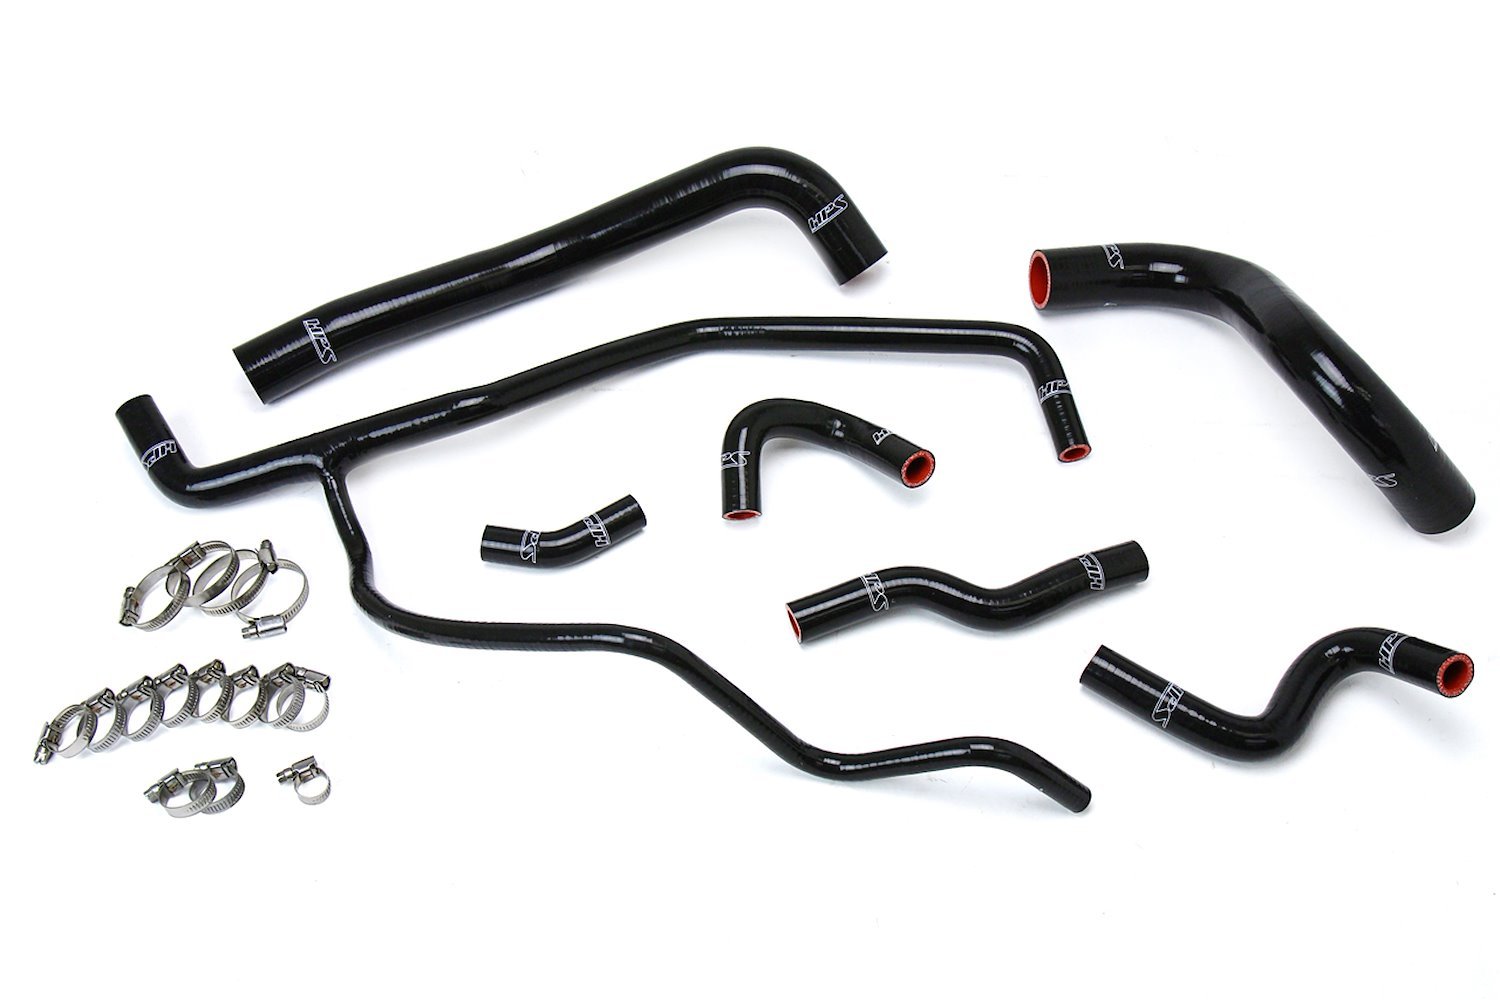 57-1583-BLK Coolant Hose Kit, High-Temp 3-Ply Reinforced Silicone, Replace Rubber Radiator Heater Coolant Hoses